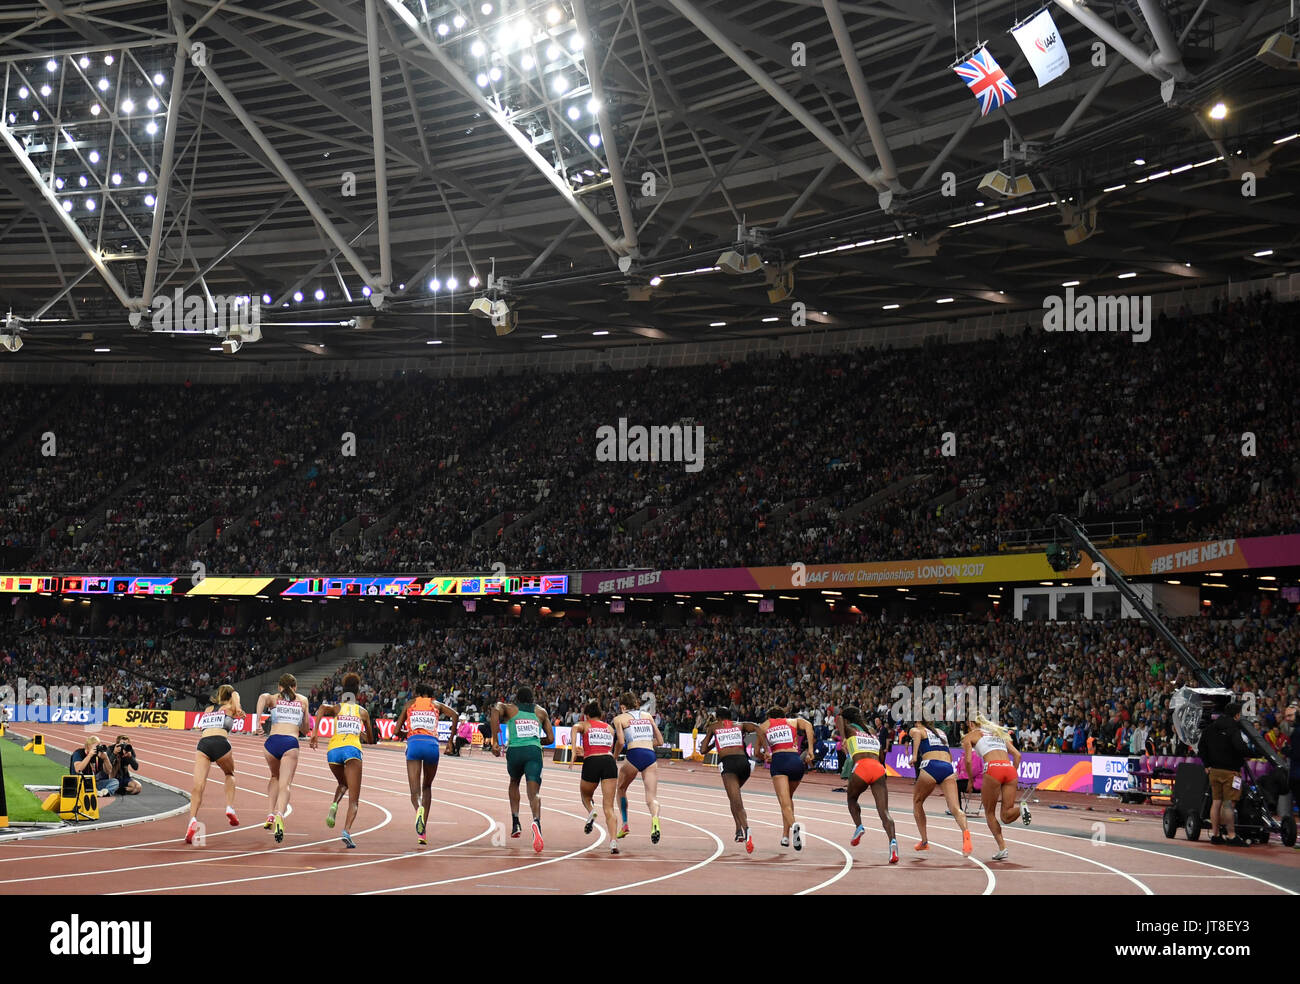 London, UK. 7th Aug, 2017. Athletes gather ahead of the women's 1500 meter running event final at the IAAF London 2017 World Athletics Championships in London, United Kingdom, 7 August 2017. Photo: Rainer Jensen/dpa/Alamy Live News Stock Photo